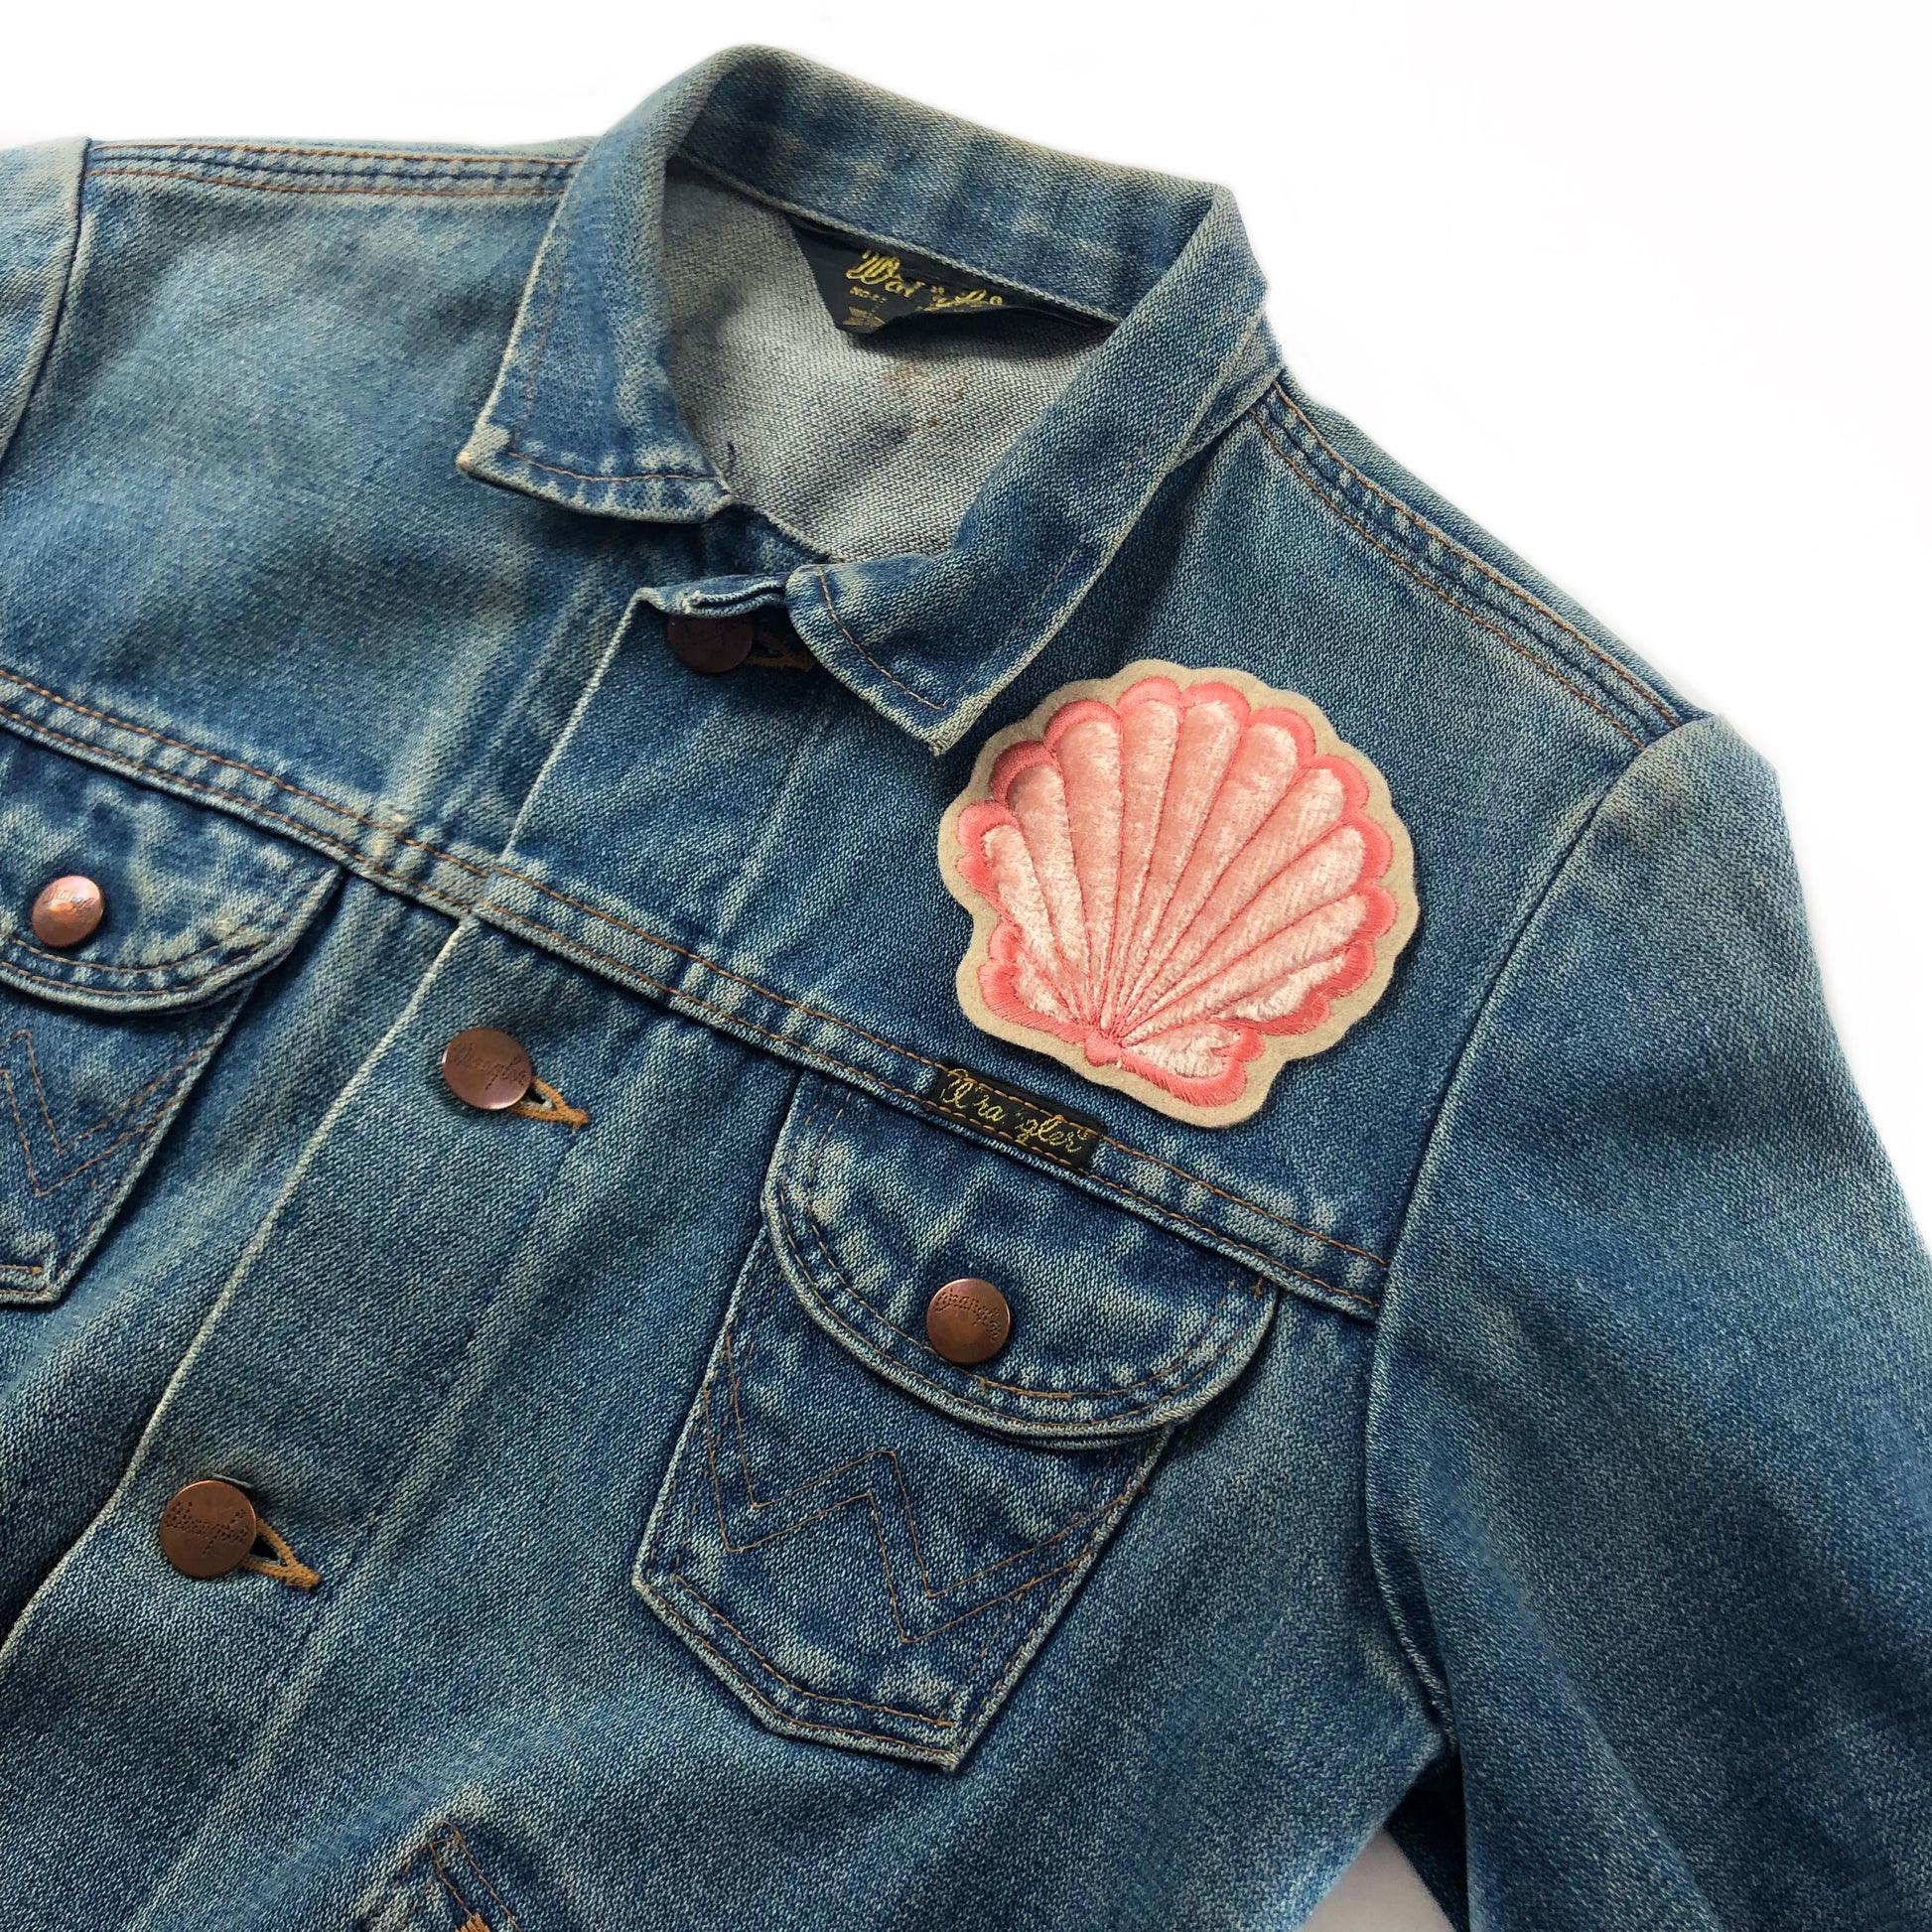 Padded velvet clam patch shown on front breast of denim jacket